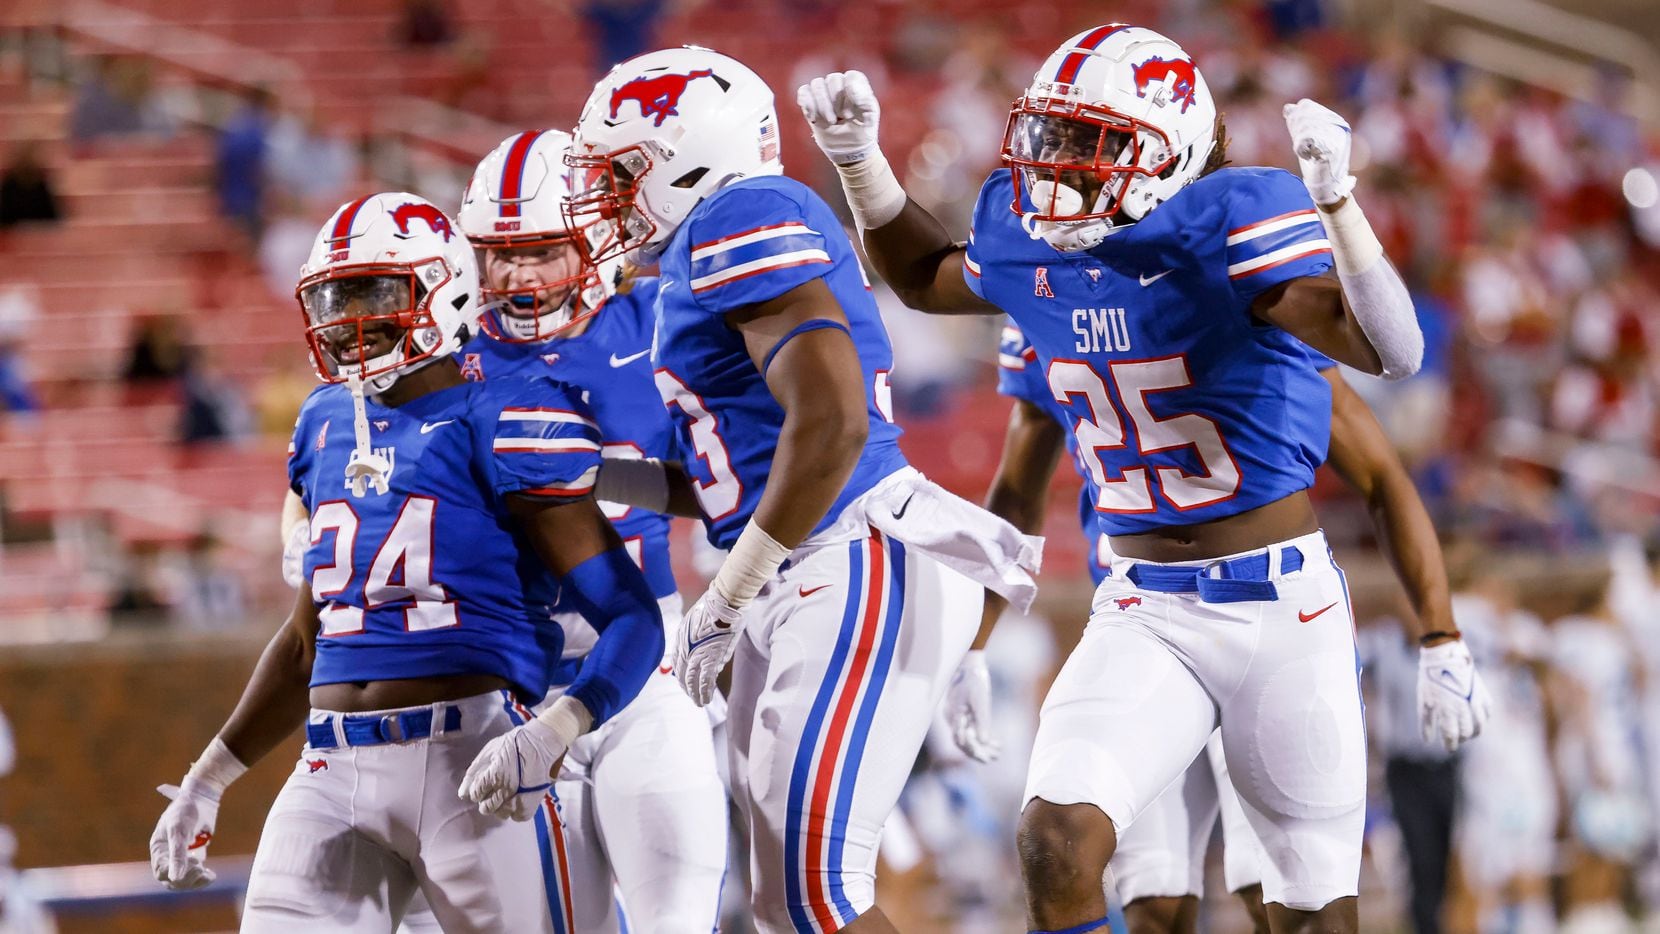 Breaking down SMU’s current roster, potential for quality additions